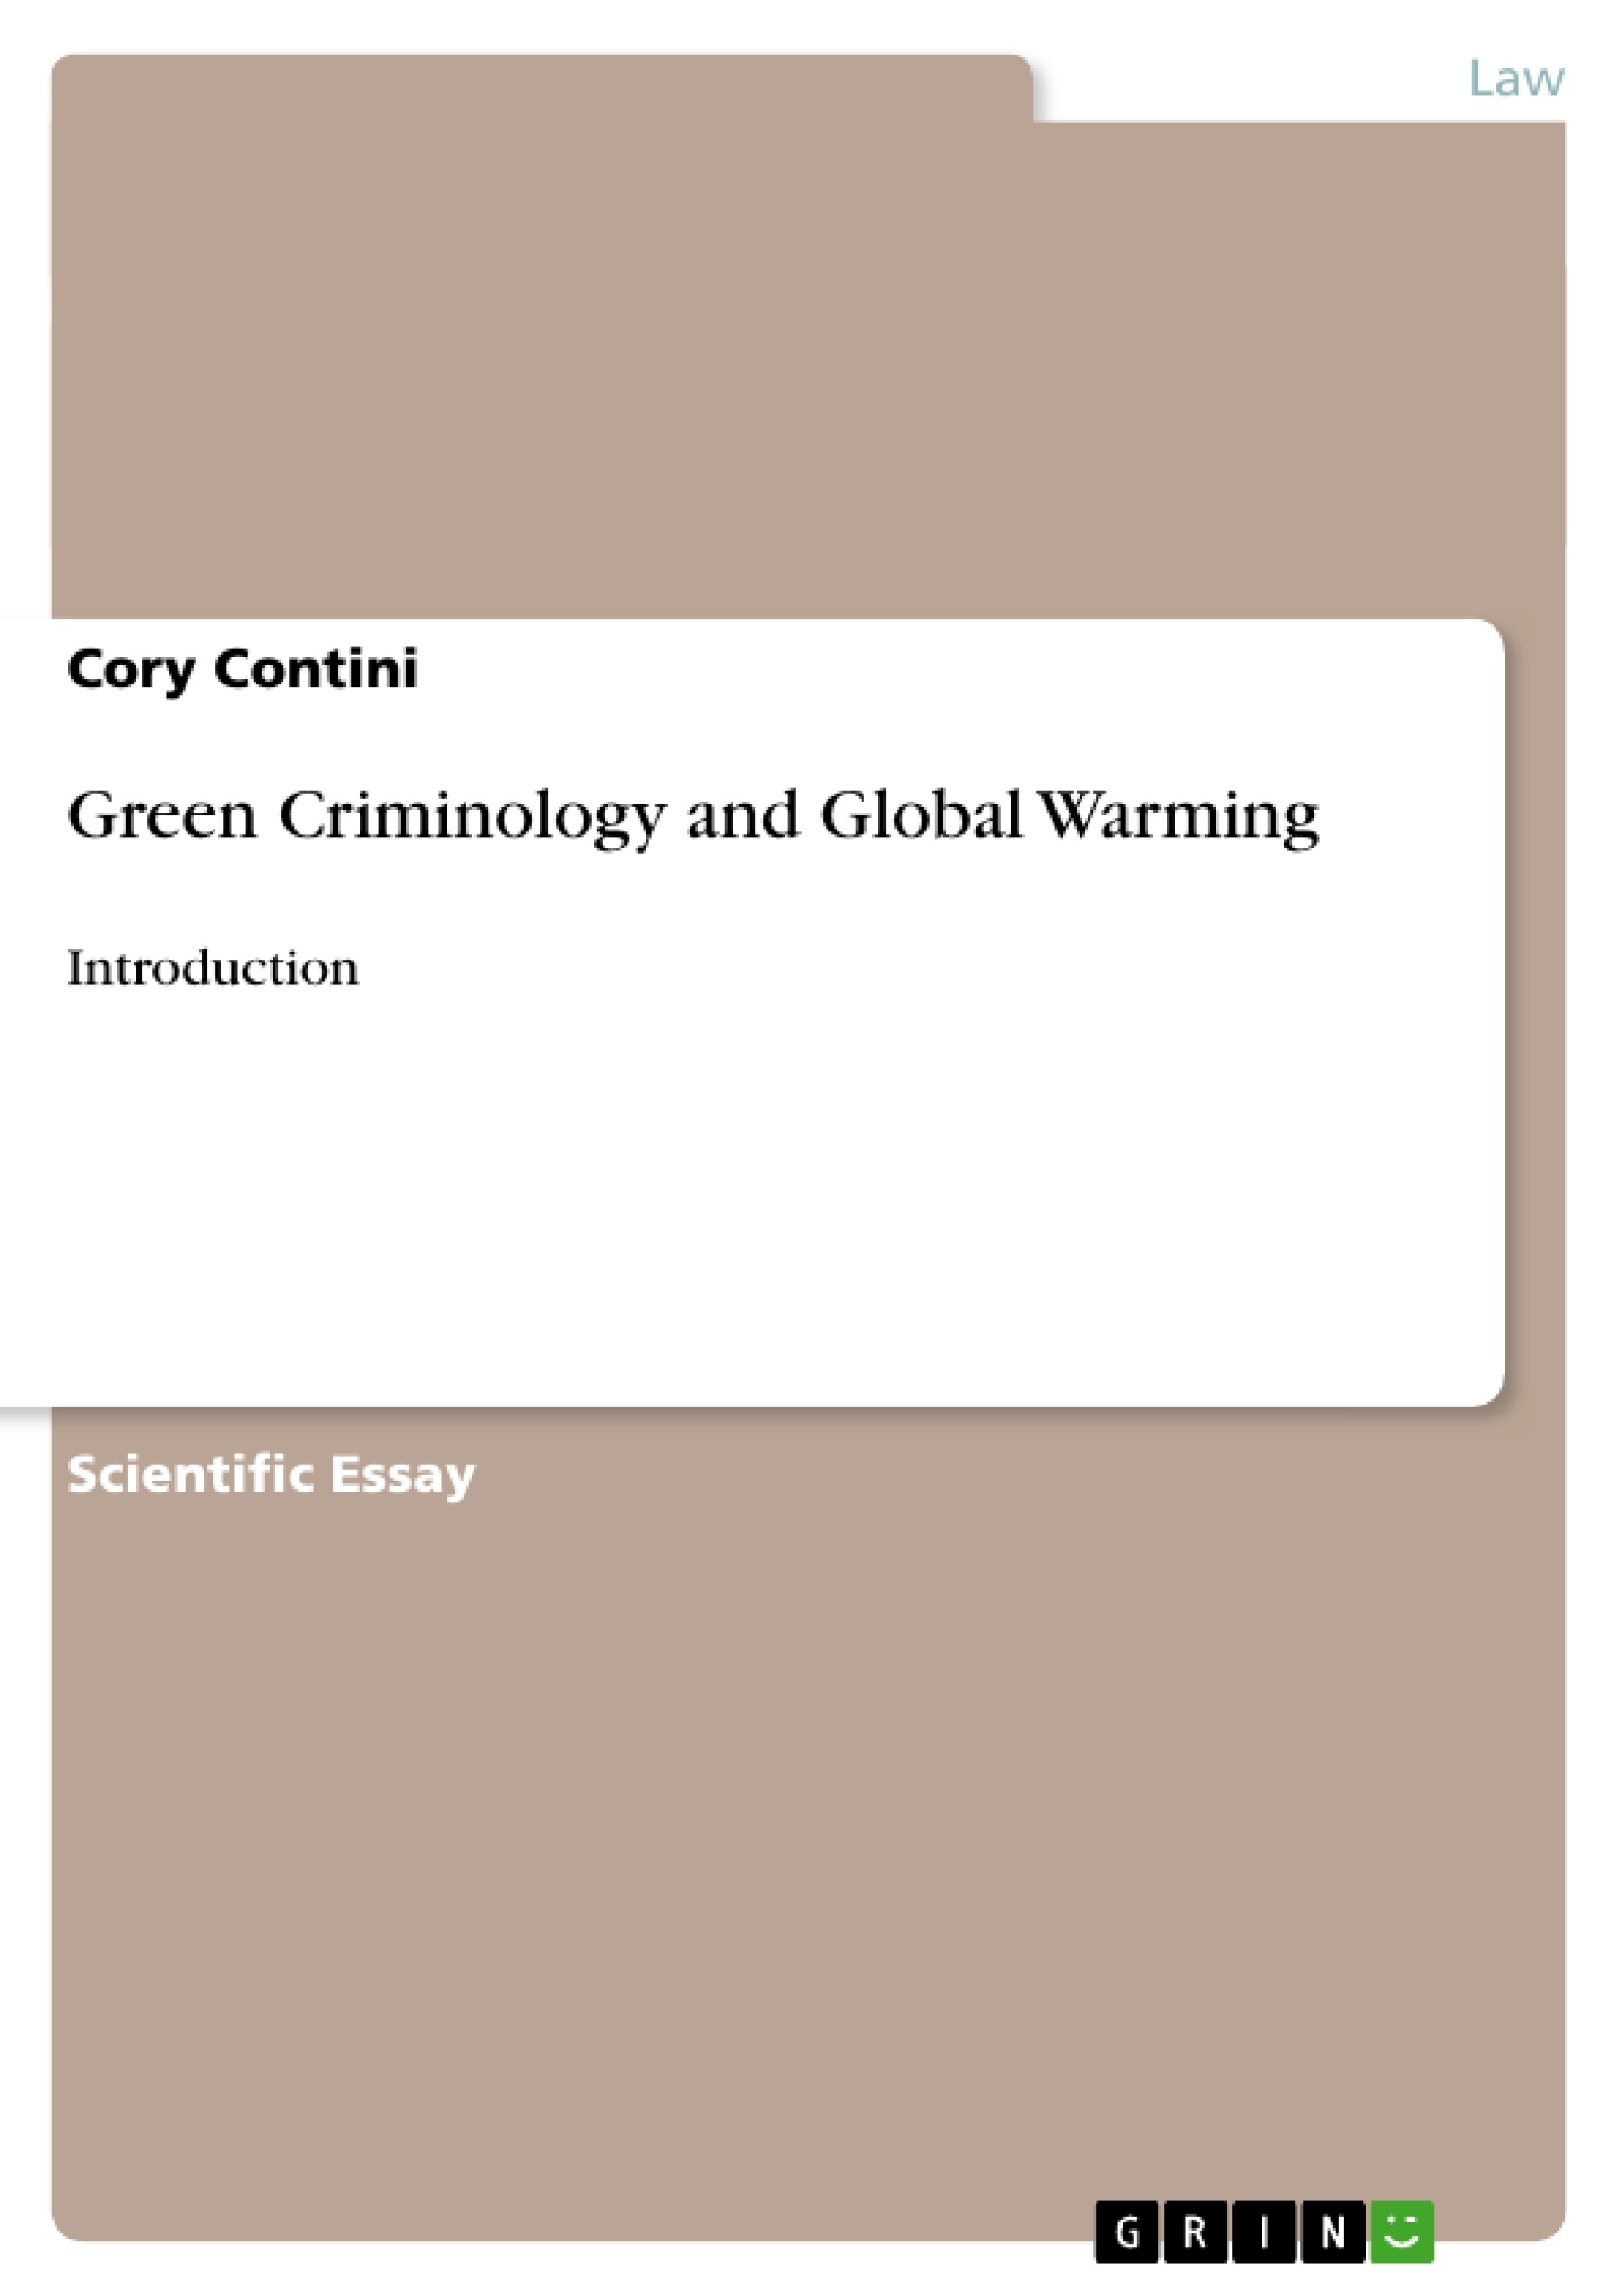 Title: Green Criminology and Global Warming